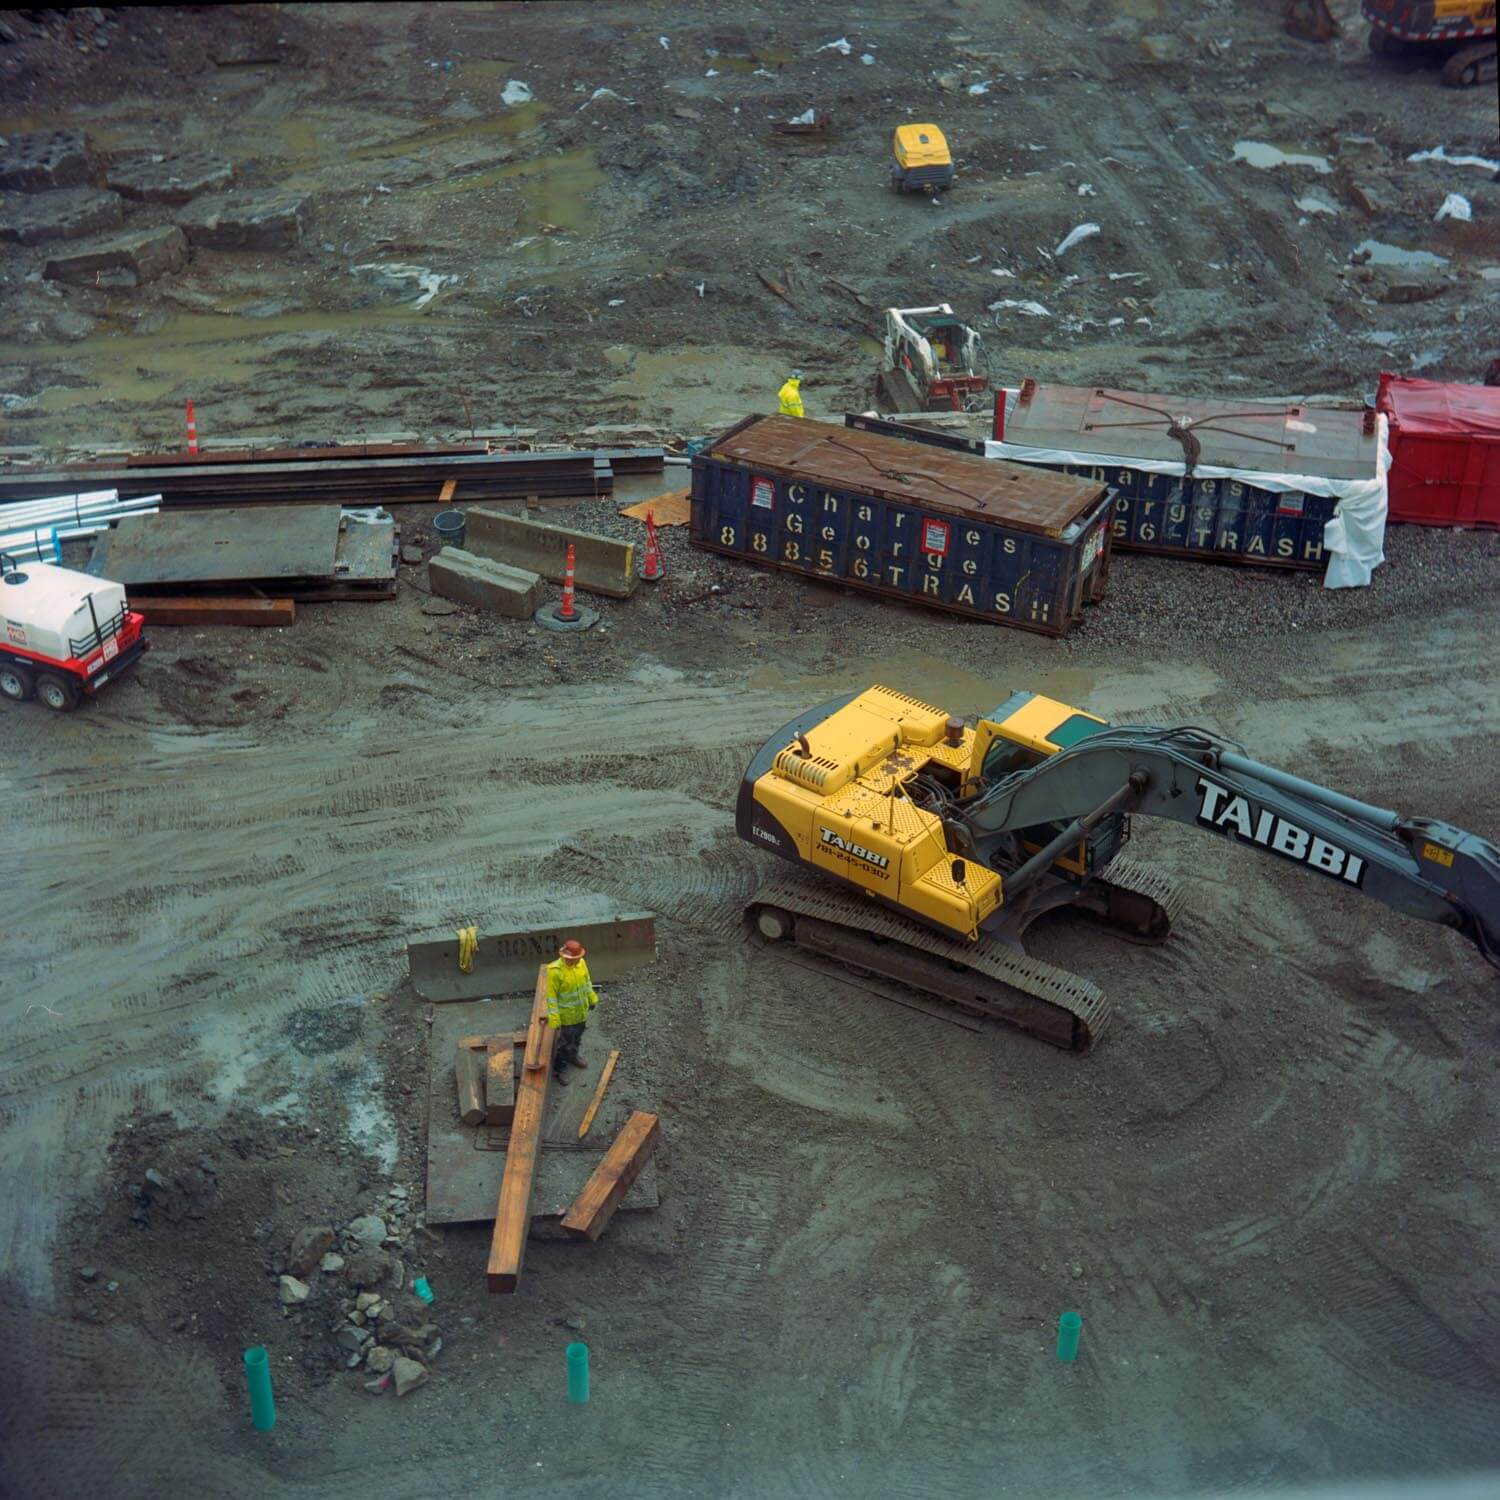 Construction site - Here again the strong diagonal subject matter fits well into the square frame. Shot on a Rollei Automat from 1949 and Ektachrome film